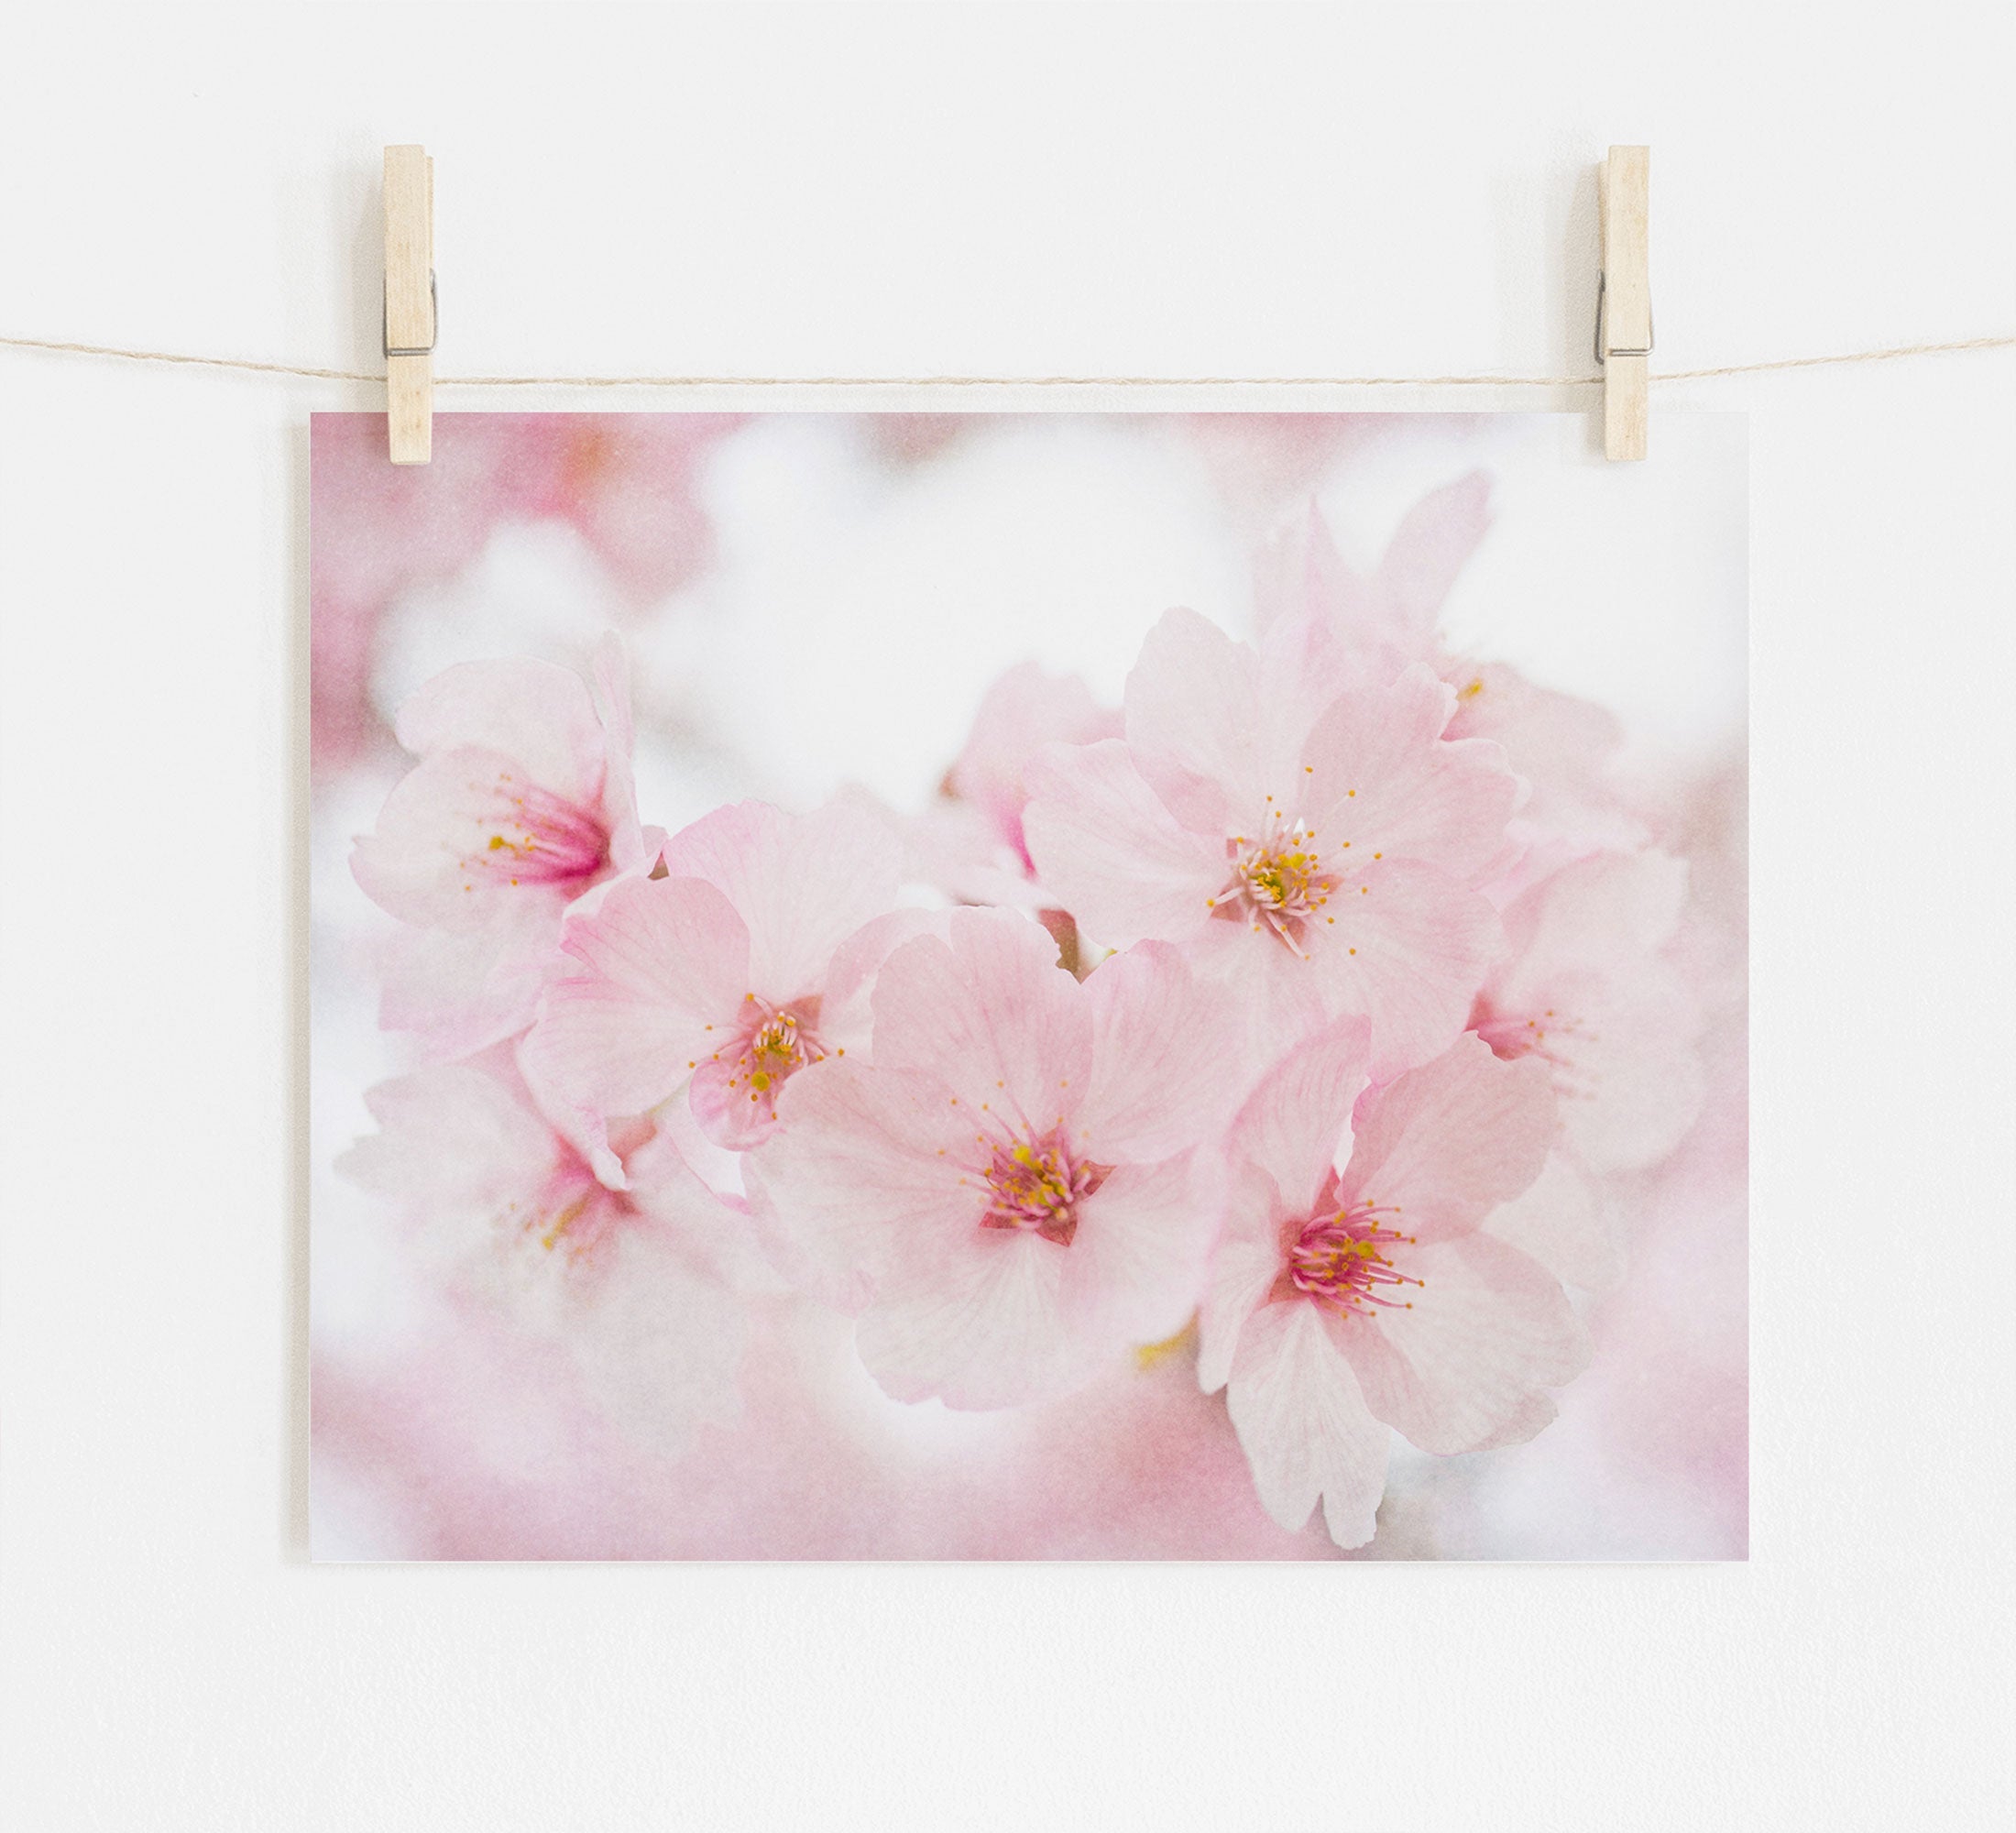 A photo of shabby pink cherry blossoms, Offley Green's 'Cherry Blossom' print, is clipped to a string by two wooden clothespins against a white wall. The image captures the delicate texture and soft color of the blooms.